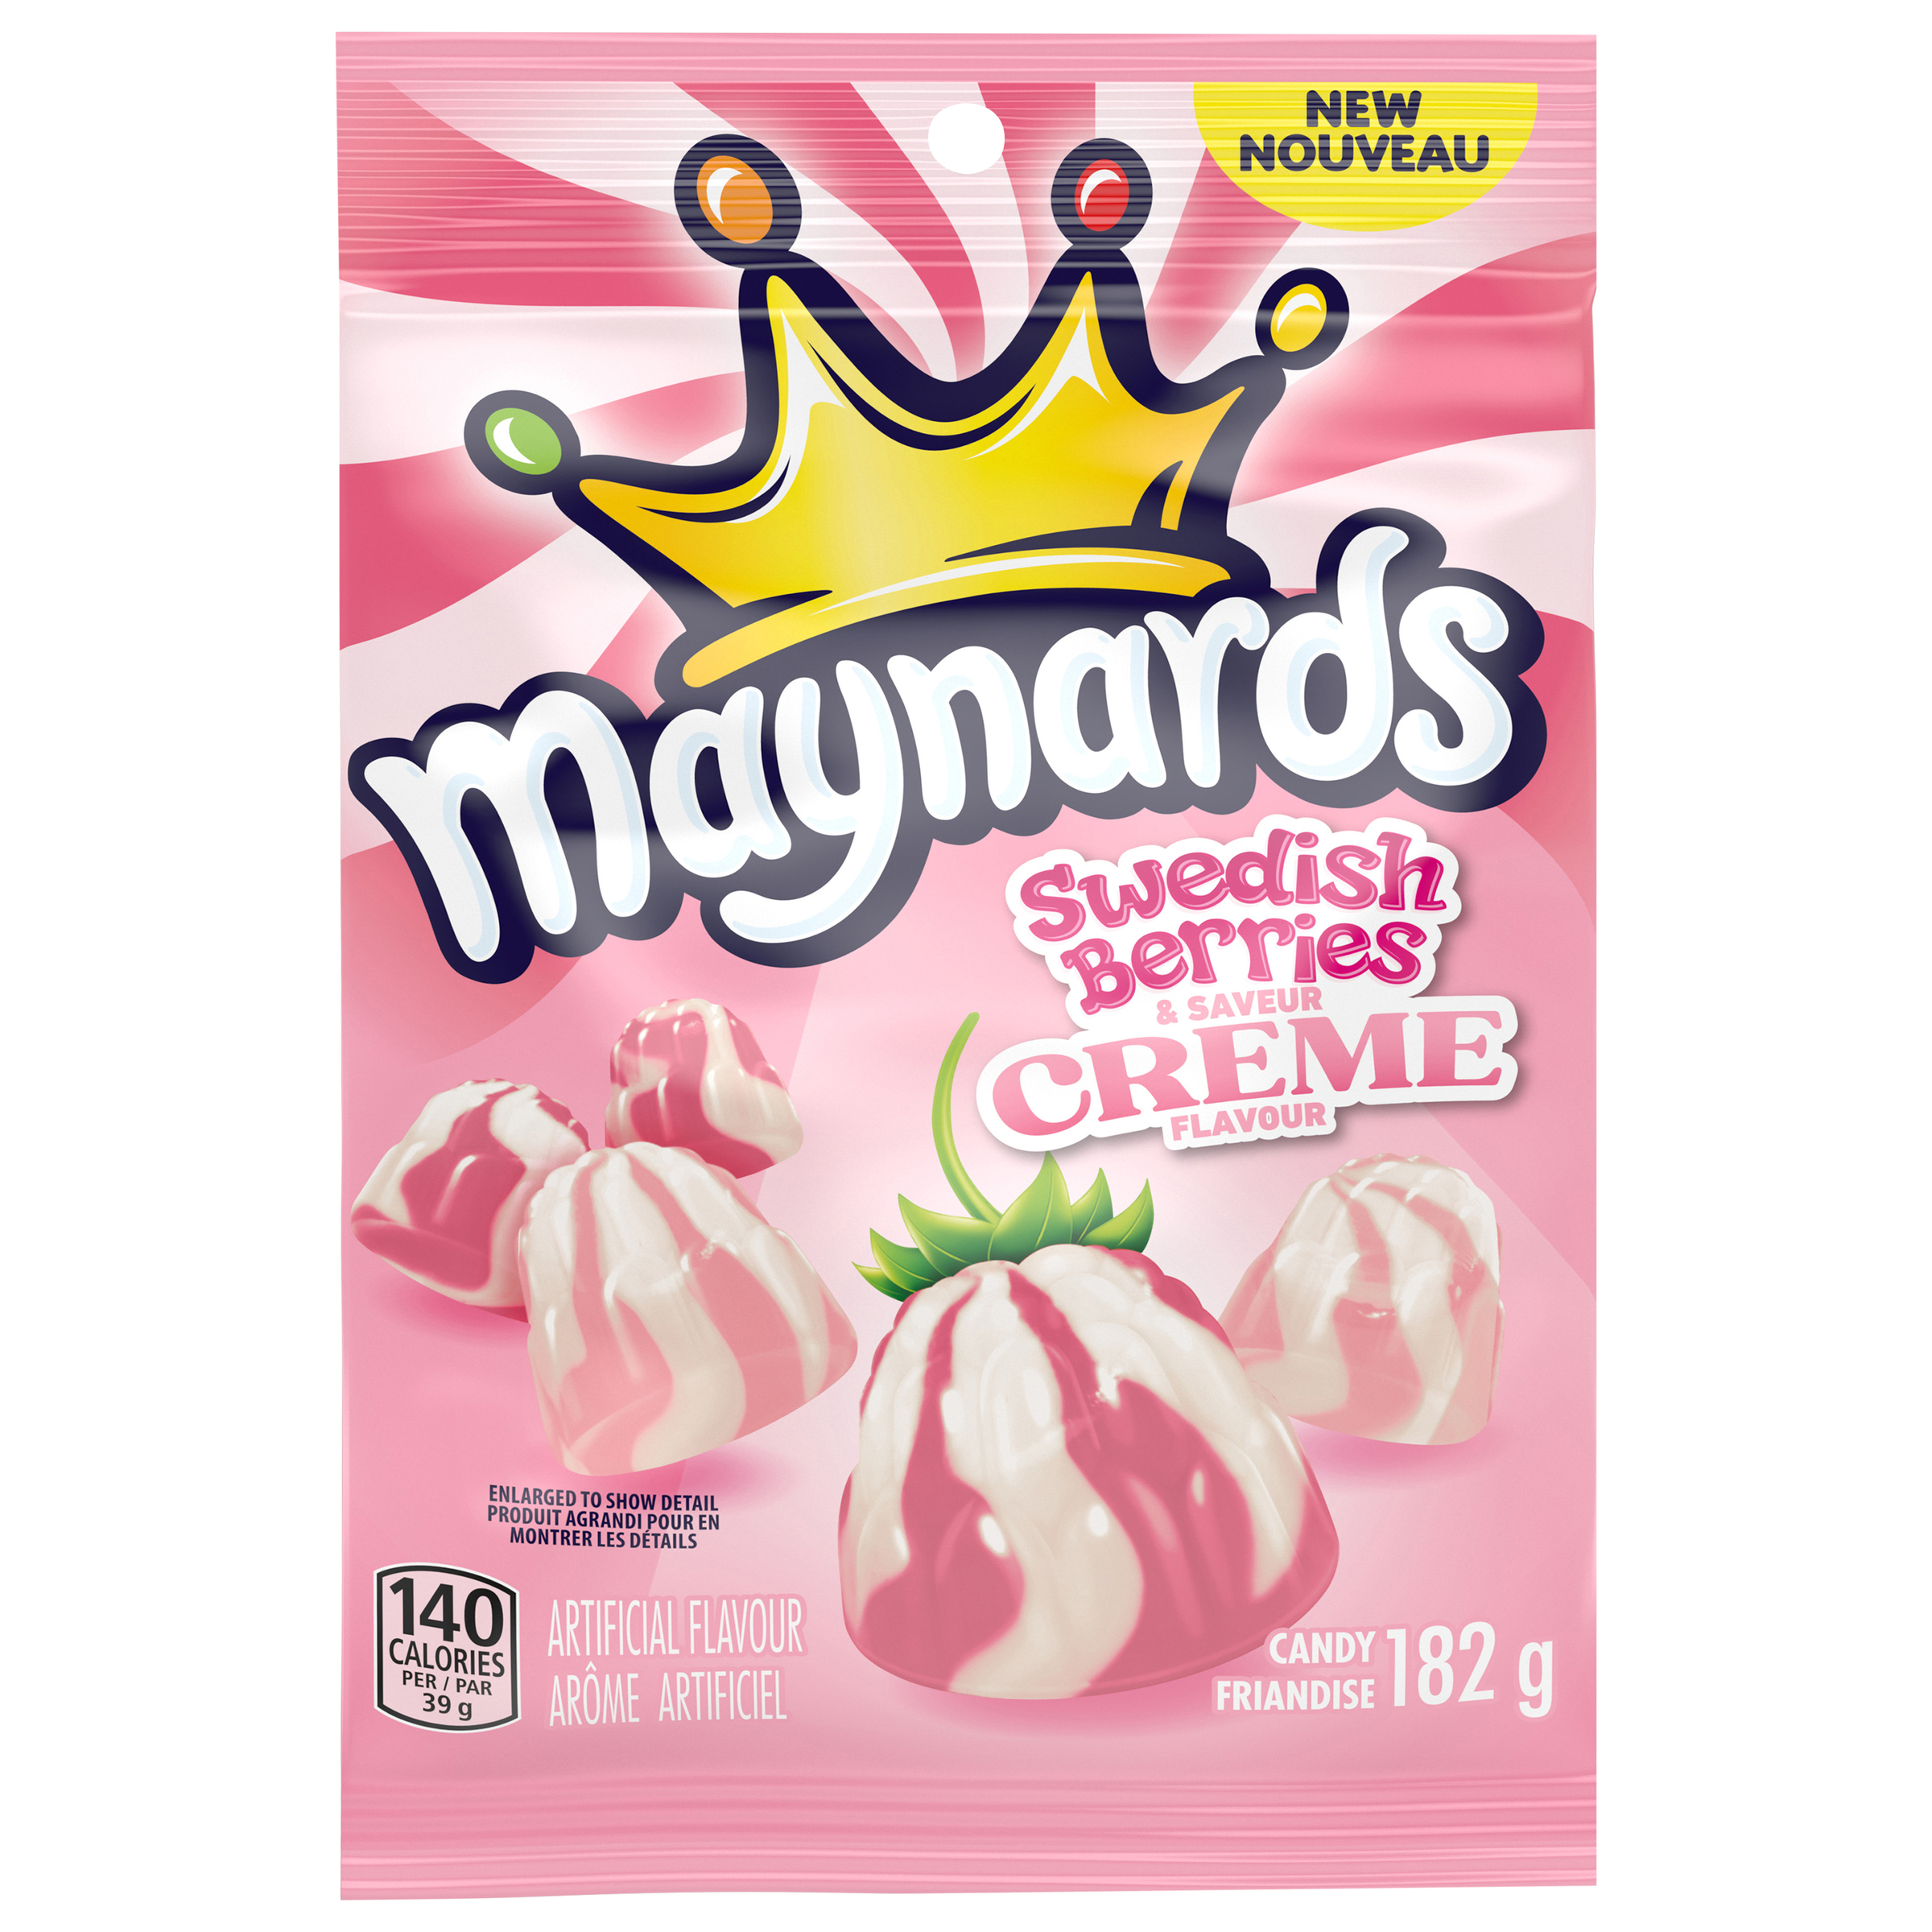 MAYNARDS SWEDISH BERRIES & CREME FLAVOUR  CANDY 182 GR